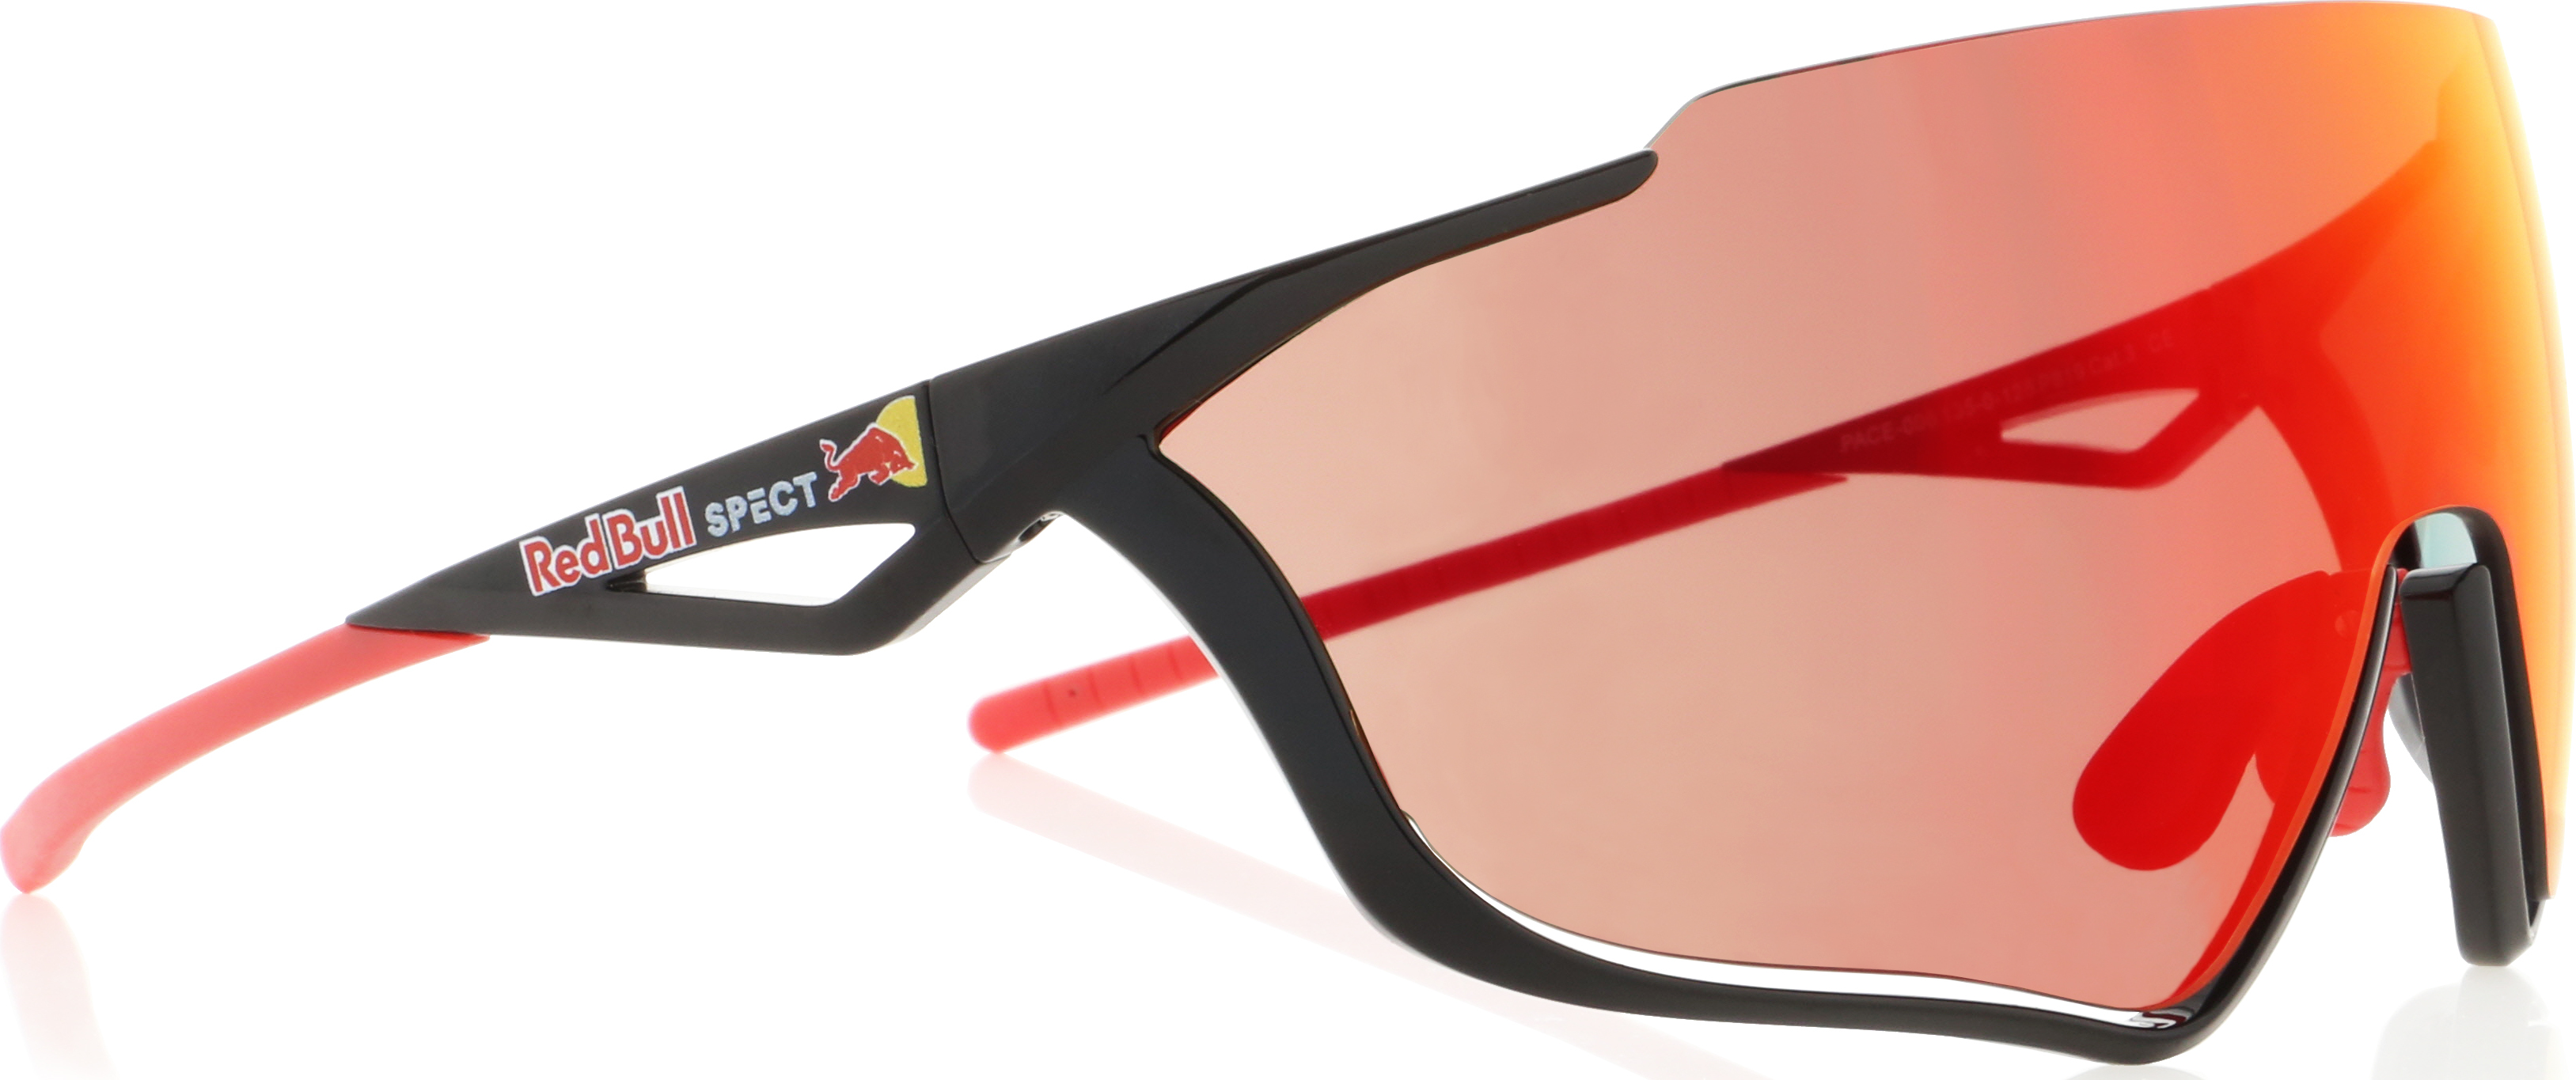 Red Bull Spect Pace Black/Smoke with Red Mirror